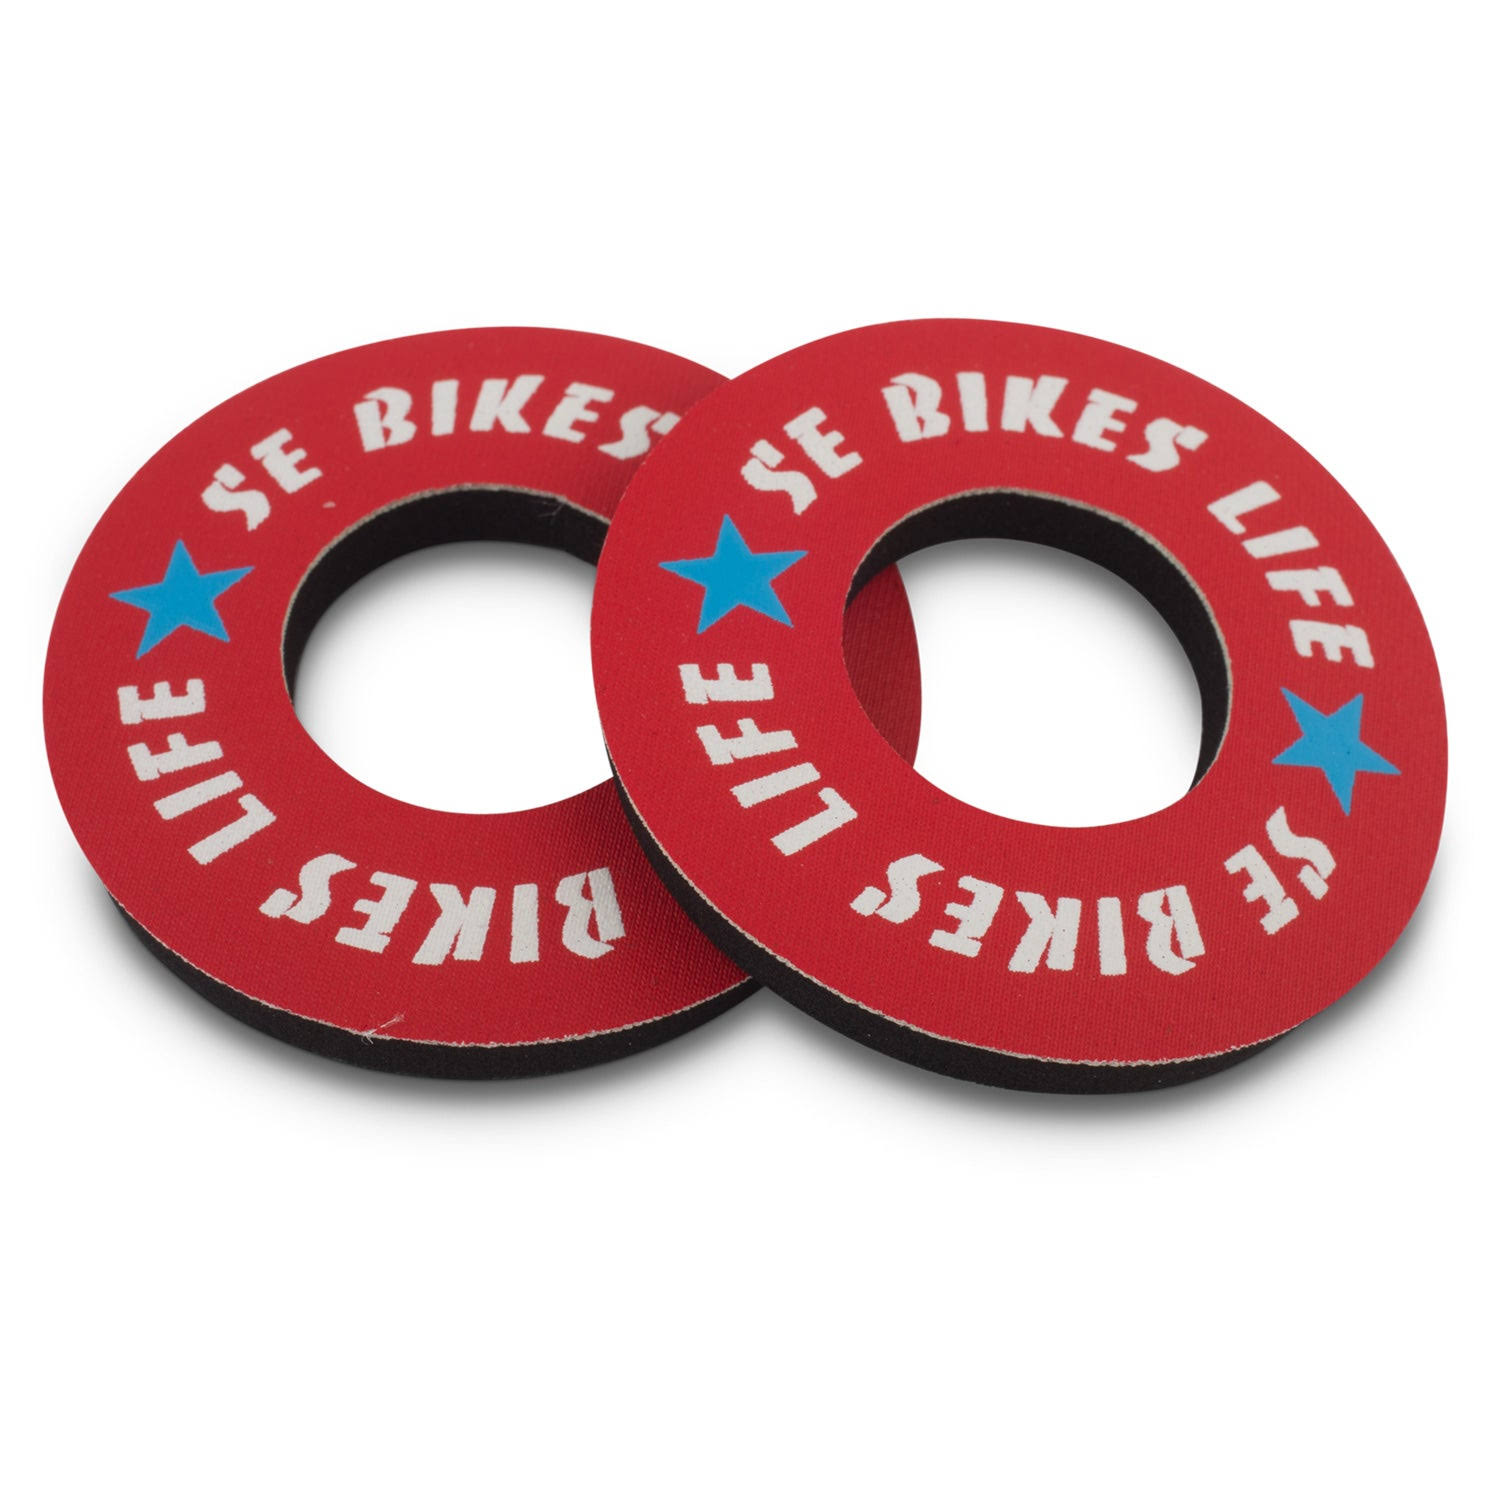 SE Bikes Life Grip Donuts, Red